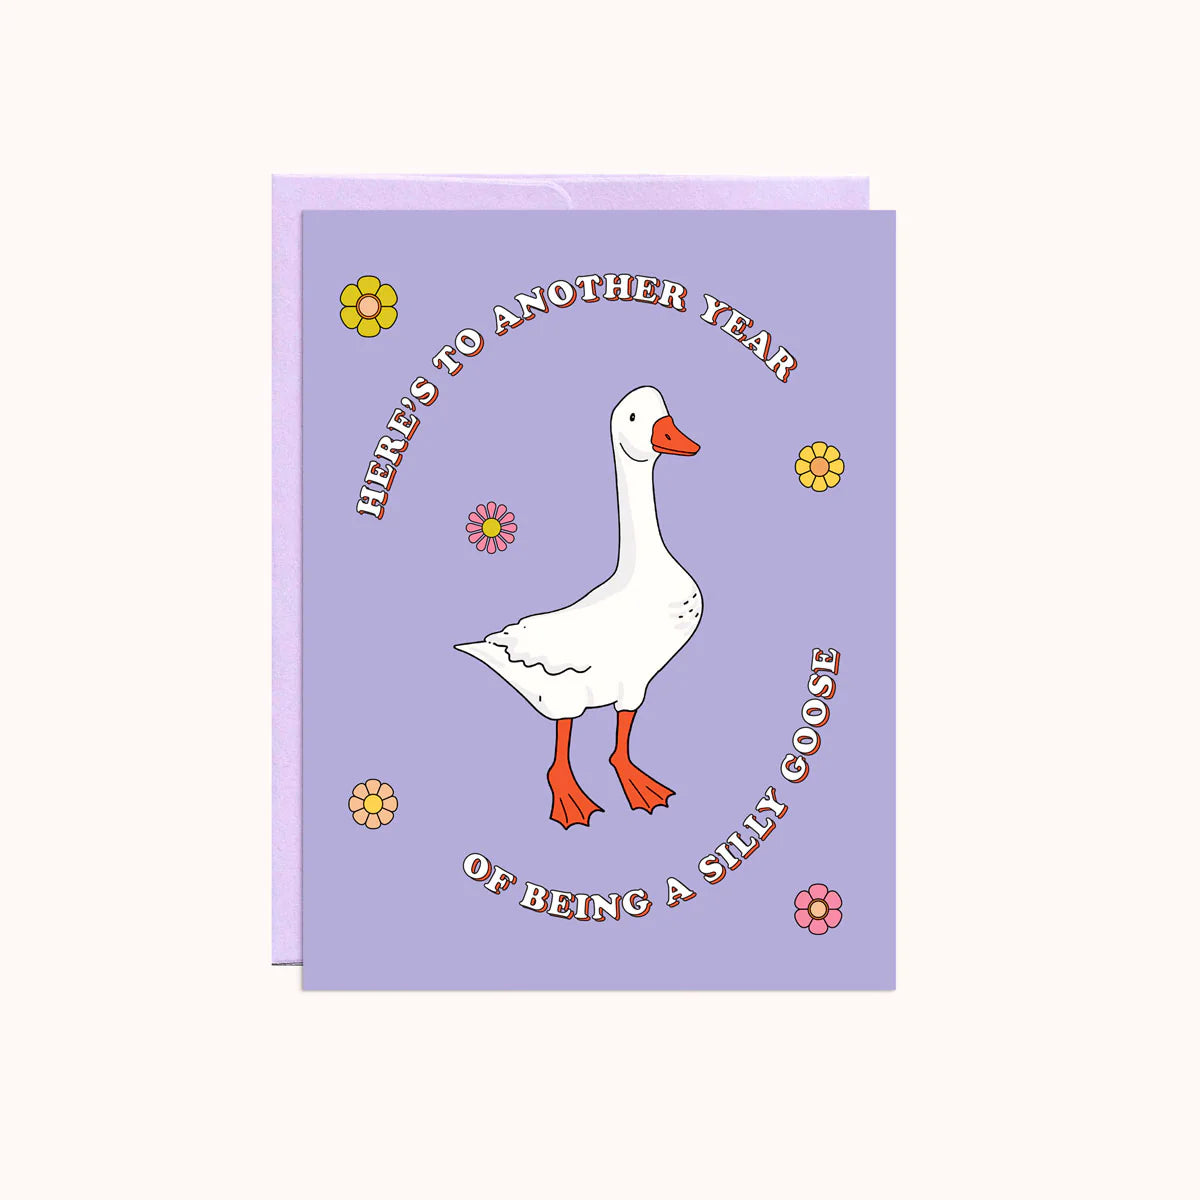 'Another Year of Being a Silly Goose' Card